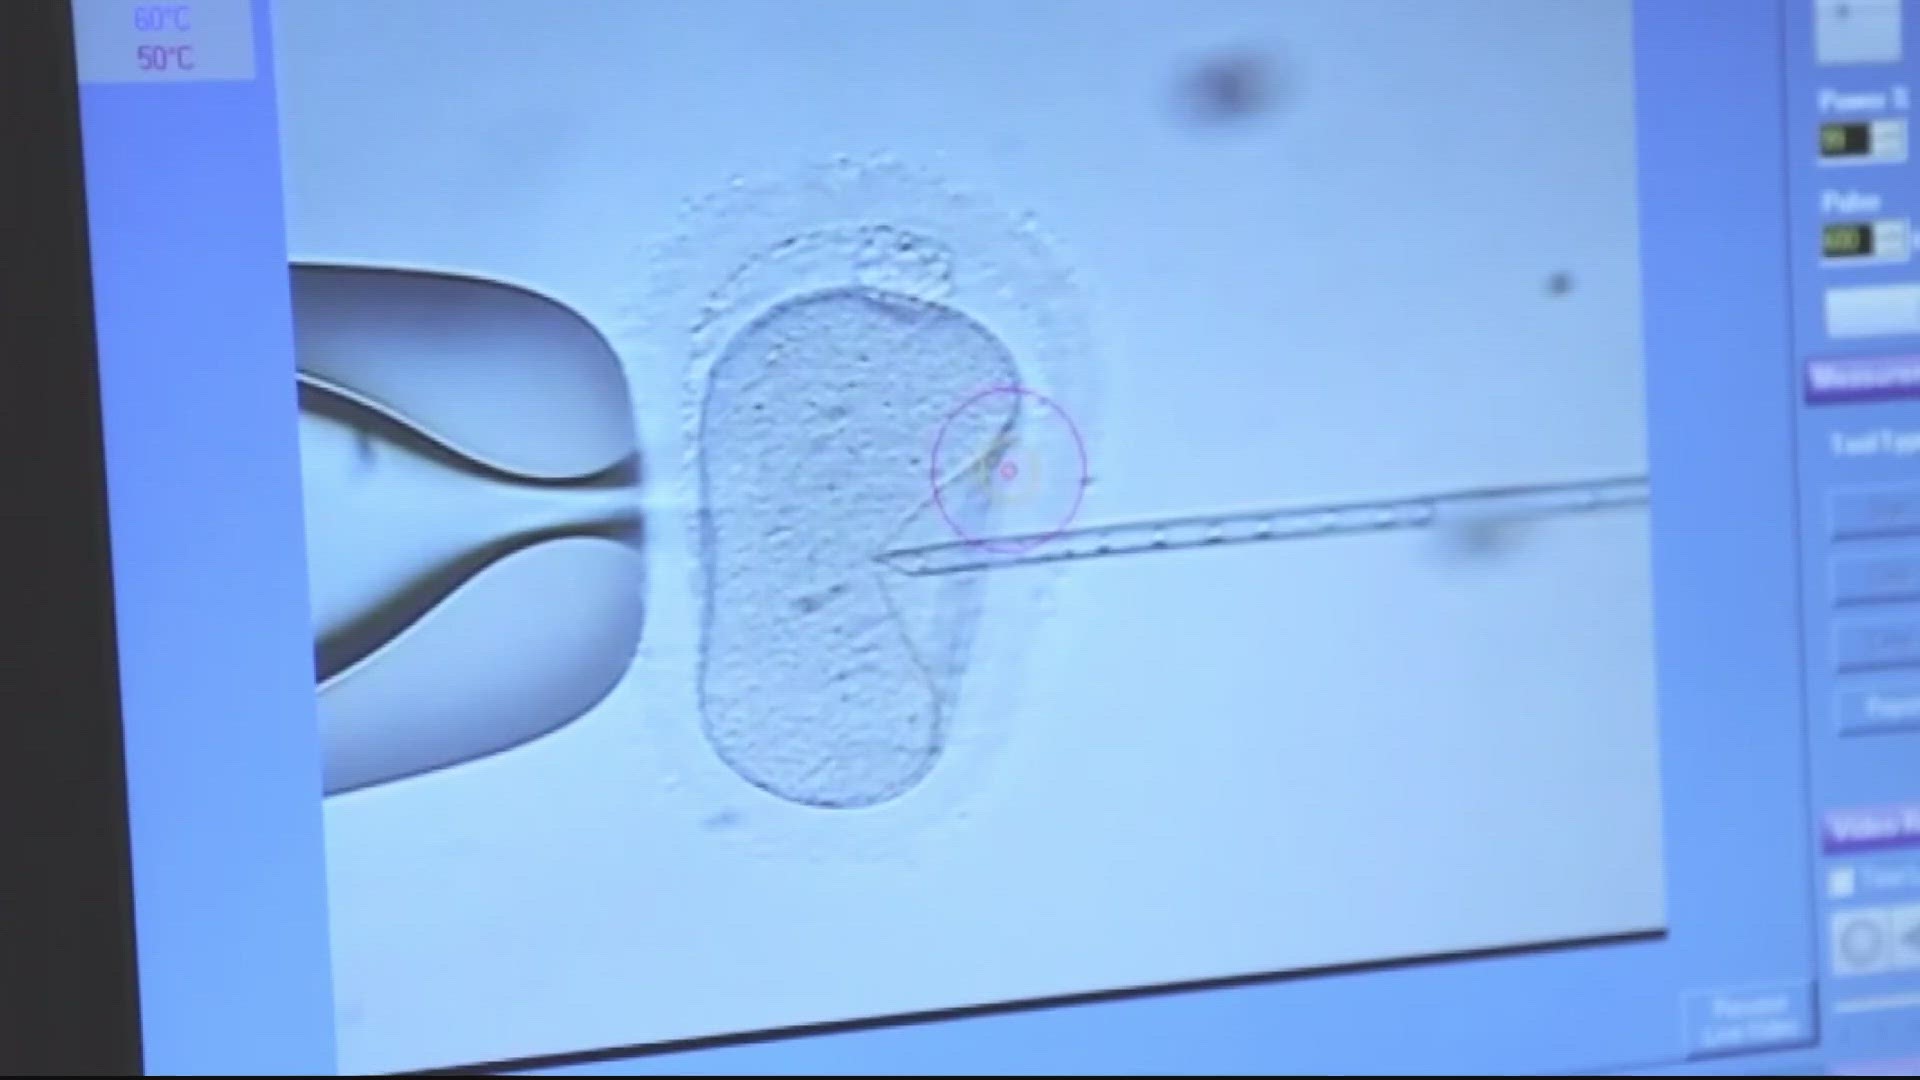 Mike Large, VP of Donor Gametes Services for California Cyrobank, discusses steps the sperm bank is taking to address the lack of diversity among donors.